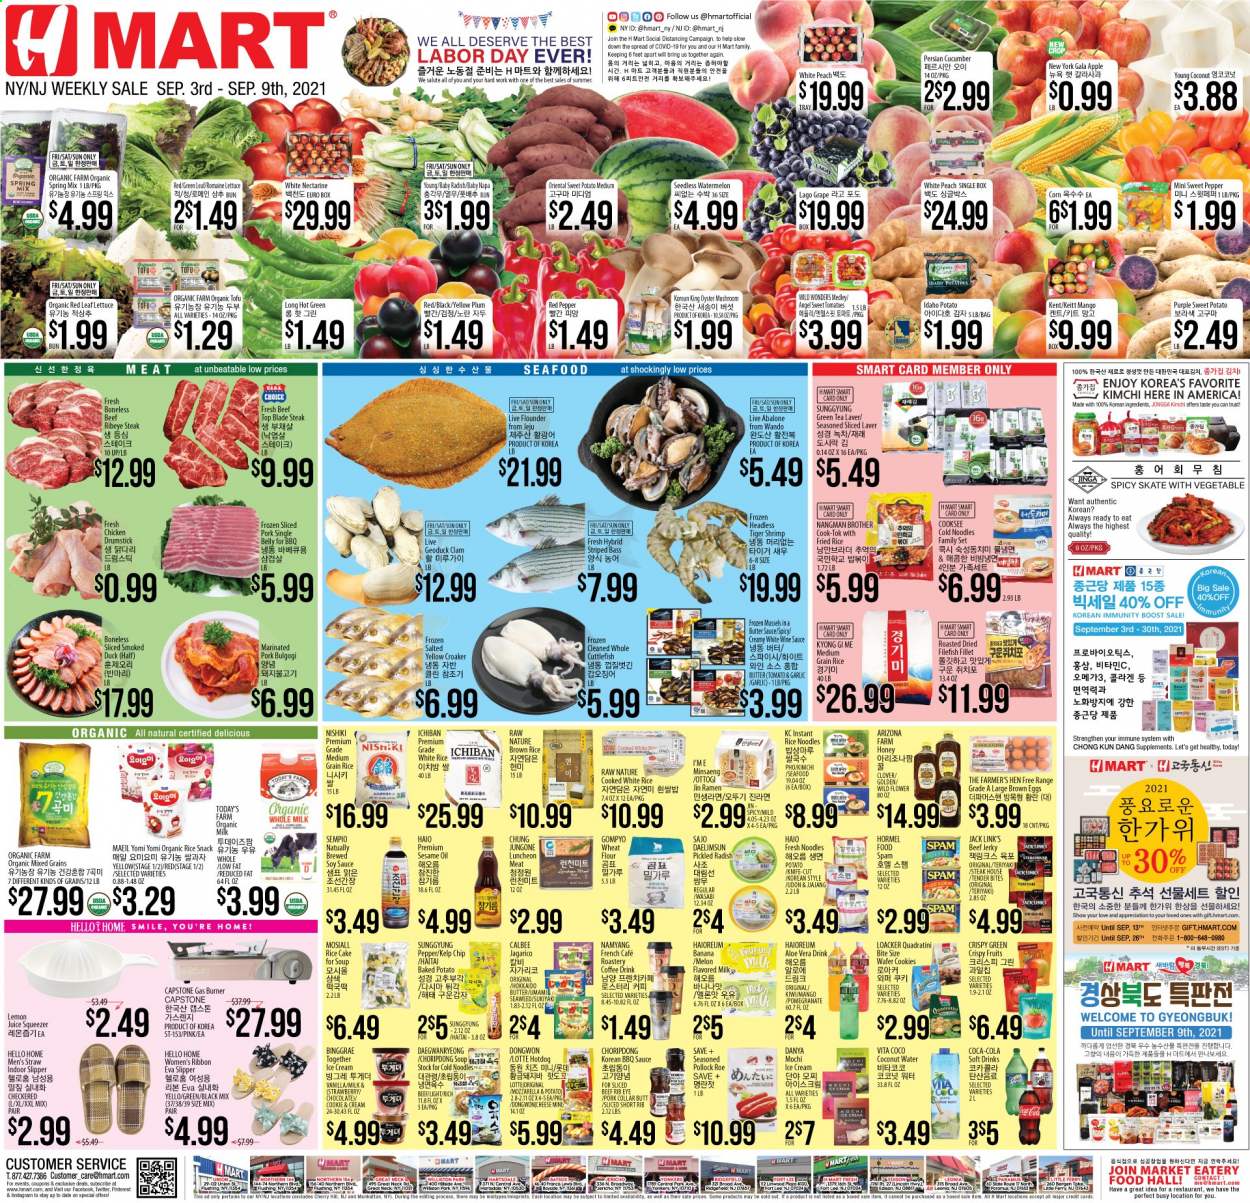 thumbnail - Hmart Flyer - 09/03/2021 - 09/09/2021 - Sales products - oyster mushrooms, mushrooms, hot dog rolls, corn, radishes, sweet potato, tomatoes, lettuce, hokkaido, Gala, kiwi, watermelon, clams, cuttlefish, flounder, mussels, pollock, oysters, seafood, shrimps, abalone, ramen, hot dog, smoked duck, soup, sauce, noodles, Hormel, beef jerky, jerky, Spam, lunch meat, mozzarella, tofu, Clover, organic milk, flavoured milk, butter, ice cream, cookies, wafers, snack, Jack Link's, flour, wheat flour, seaweed, brown rice, white rice, rice vermicelli, medium grain rice, wasabi, BBQ sauce, soy sauce, sesame oil, oil, honey, Coca-Cola, soft drink, AriZona, lemon juice, Boost, green tea, tea, coffee, white wine, beef meat, beef steak, steak, ribeye steak, top blade, pork meat, marinated pork, bag, tray, straw, squeezer, Brother, nectarines, melons, pomegranate. Page 1.